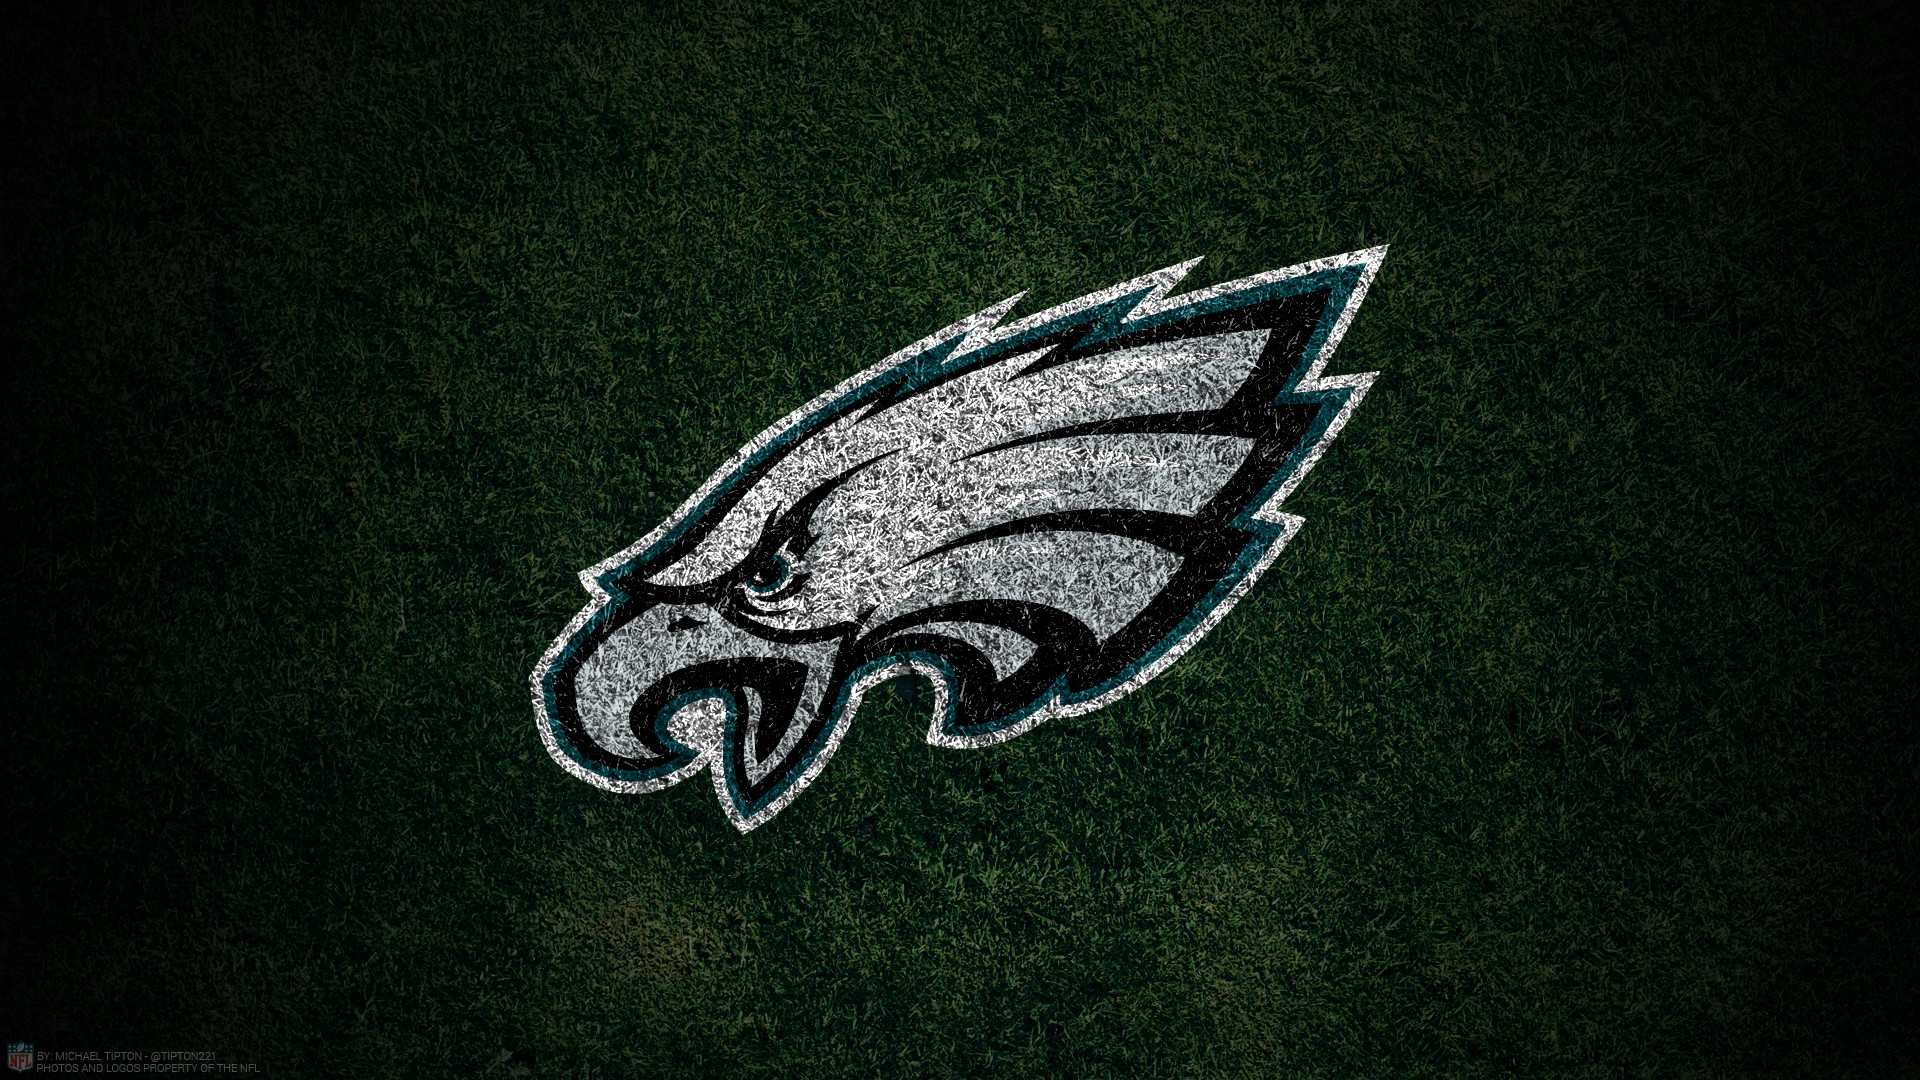 1920x1080 ... Cool Pc Backgrounds Hd Free Philadelphia Eagles Wallpapers in 2017 Philadelphia  Eagles Wallpapers PC iPhone Android